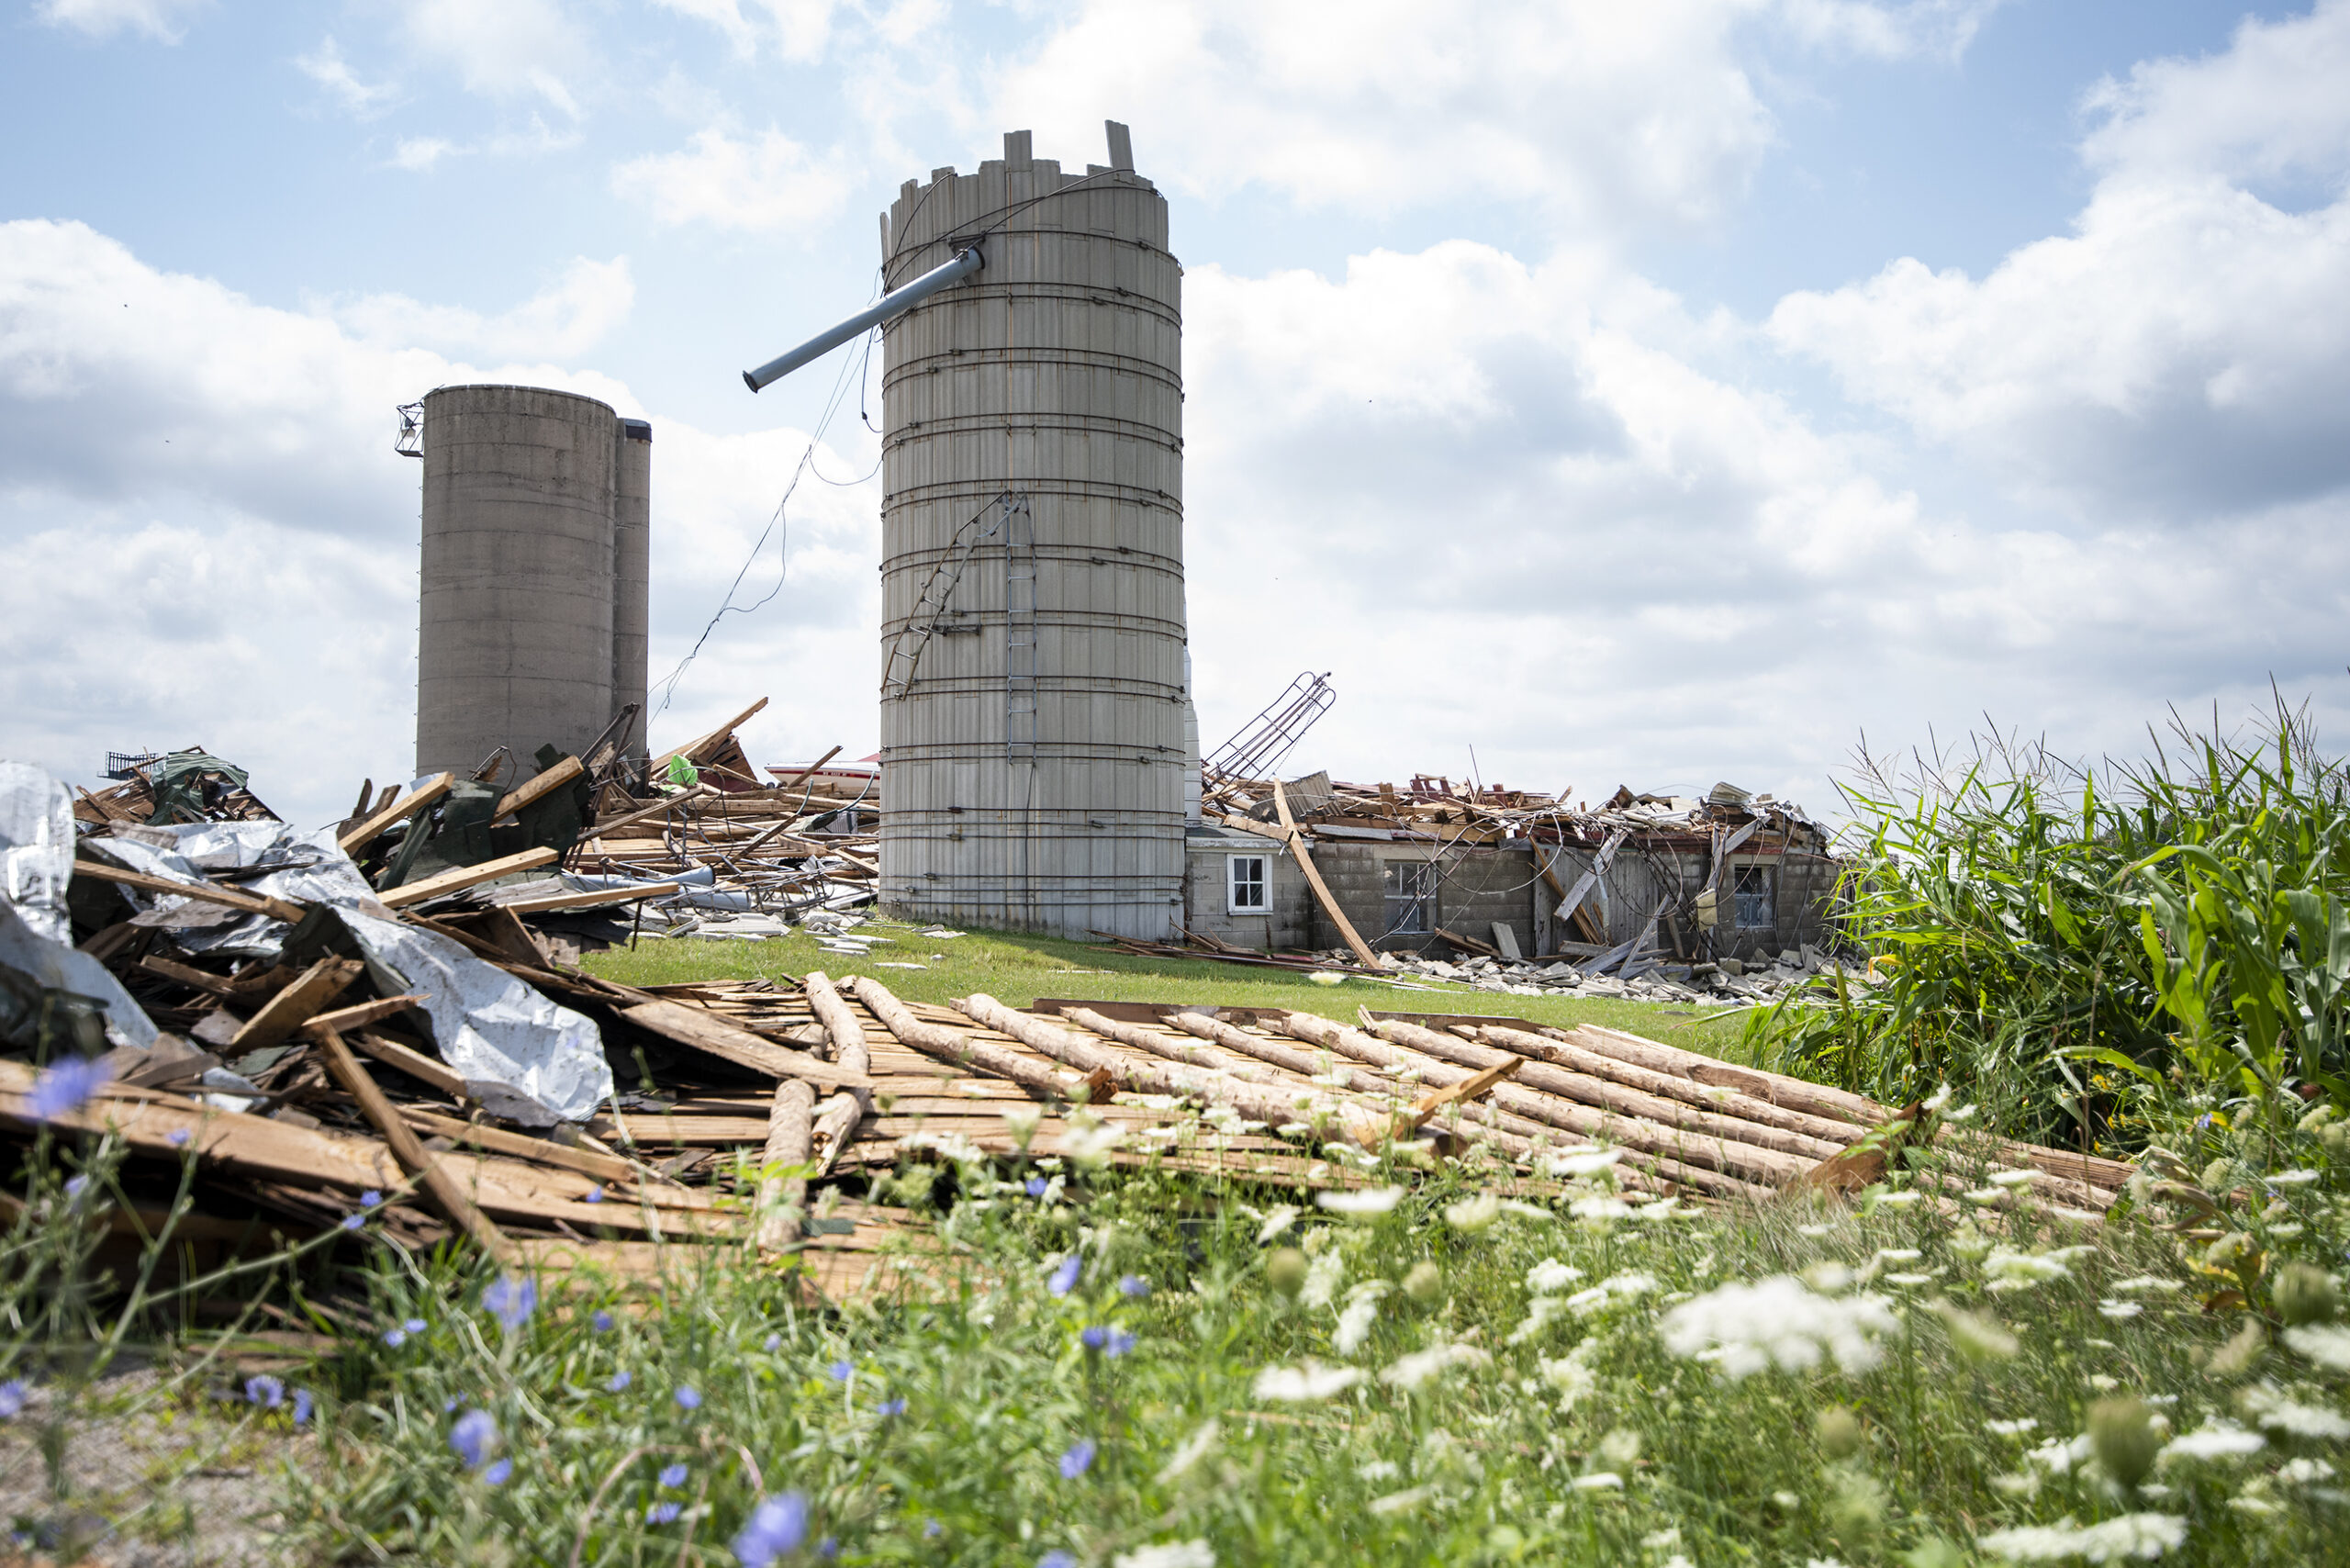 Two silos stand among a pile of wooden rubble.